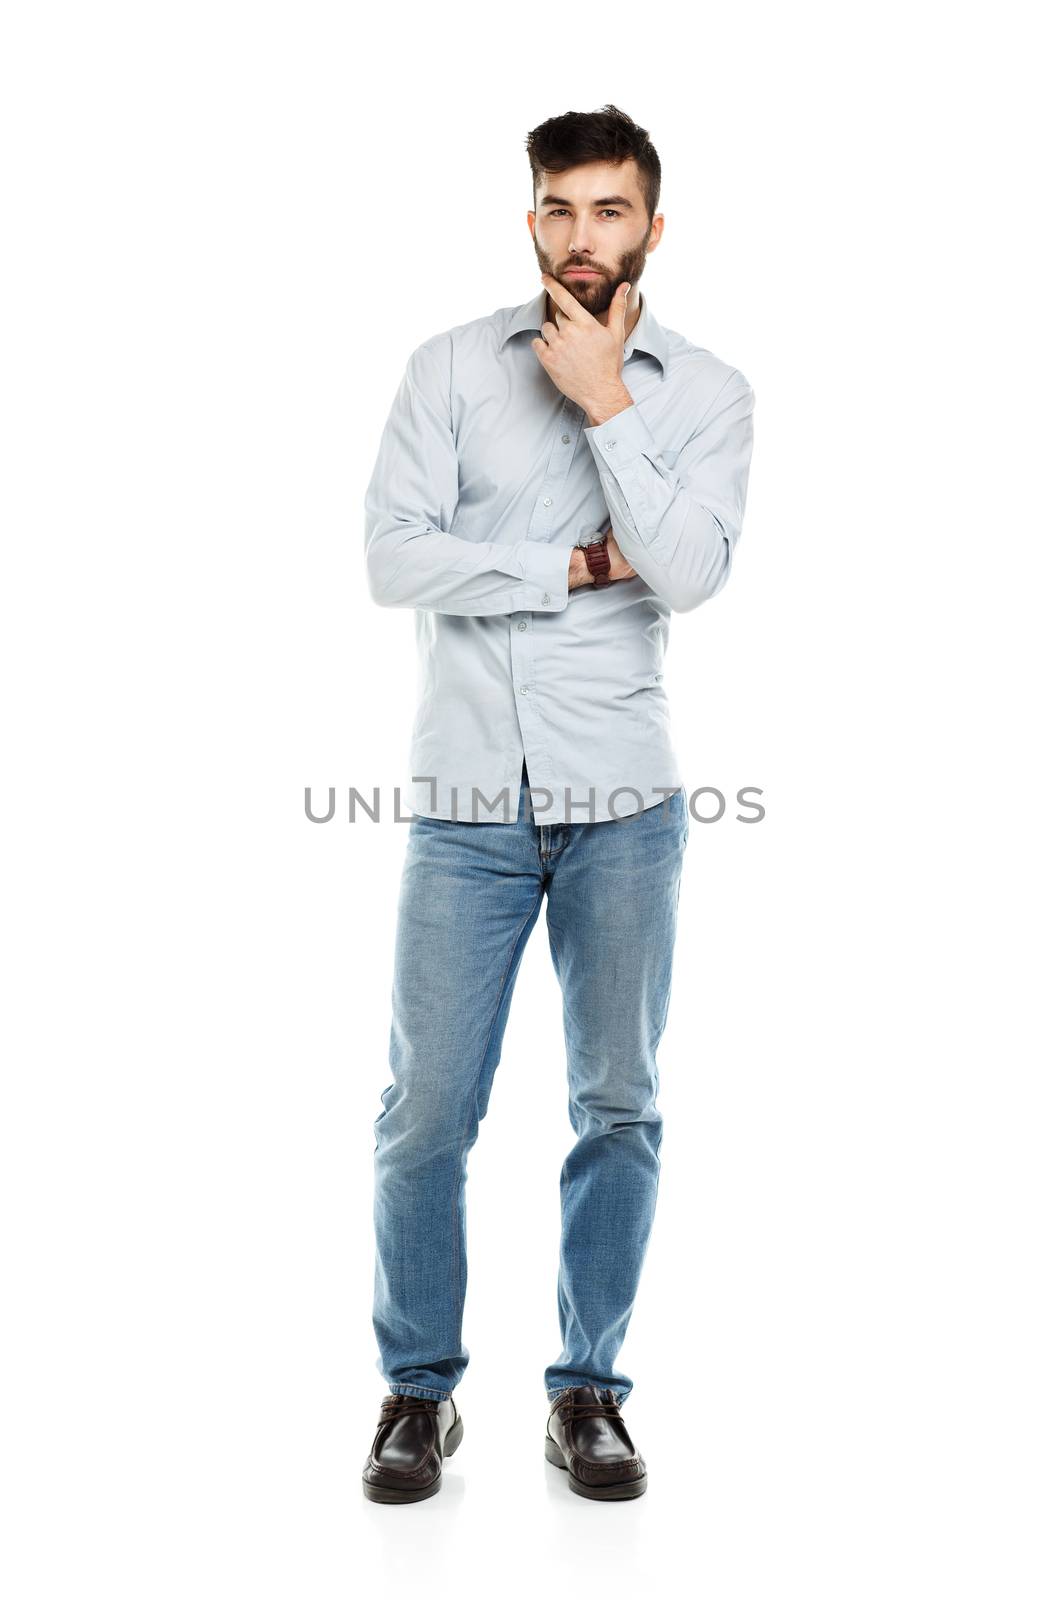 A young bearded man with a serious expression on his face isolated on white background